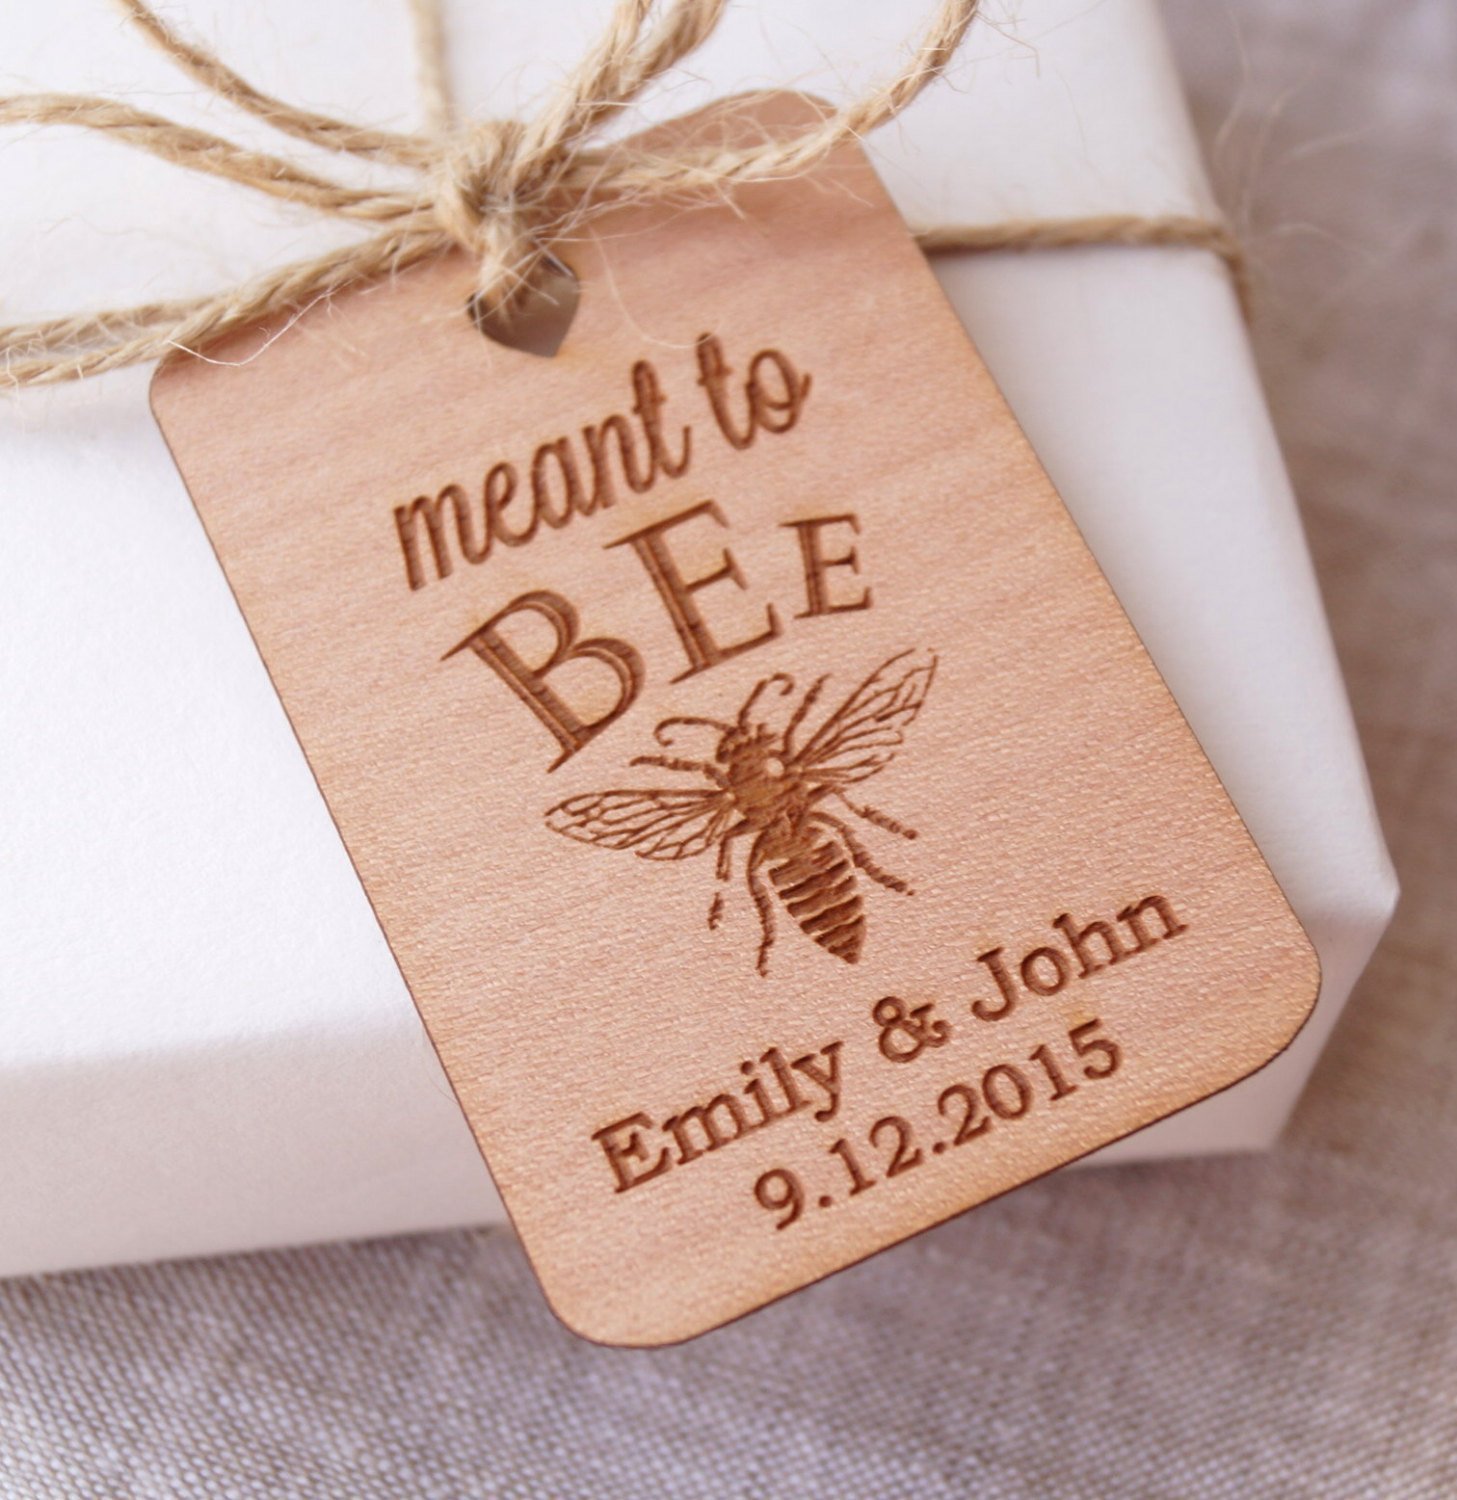 personalized wedding favors, wedding favors, wedding favours, wedding party favors, wedding favor ideas, personalized party favors, personalized favors